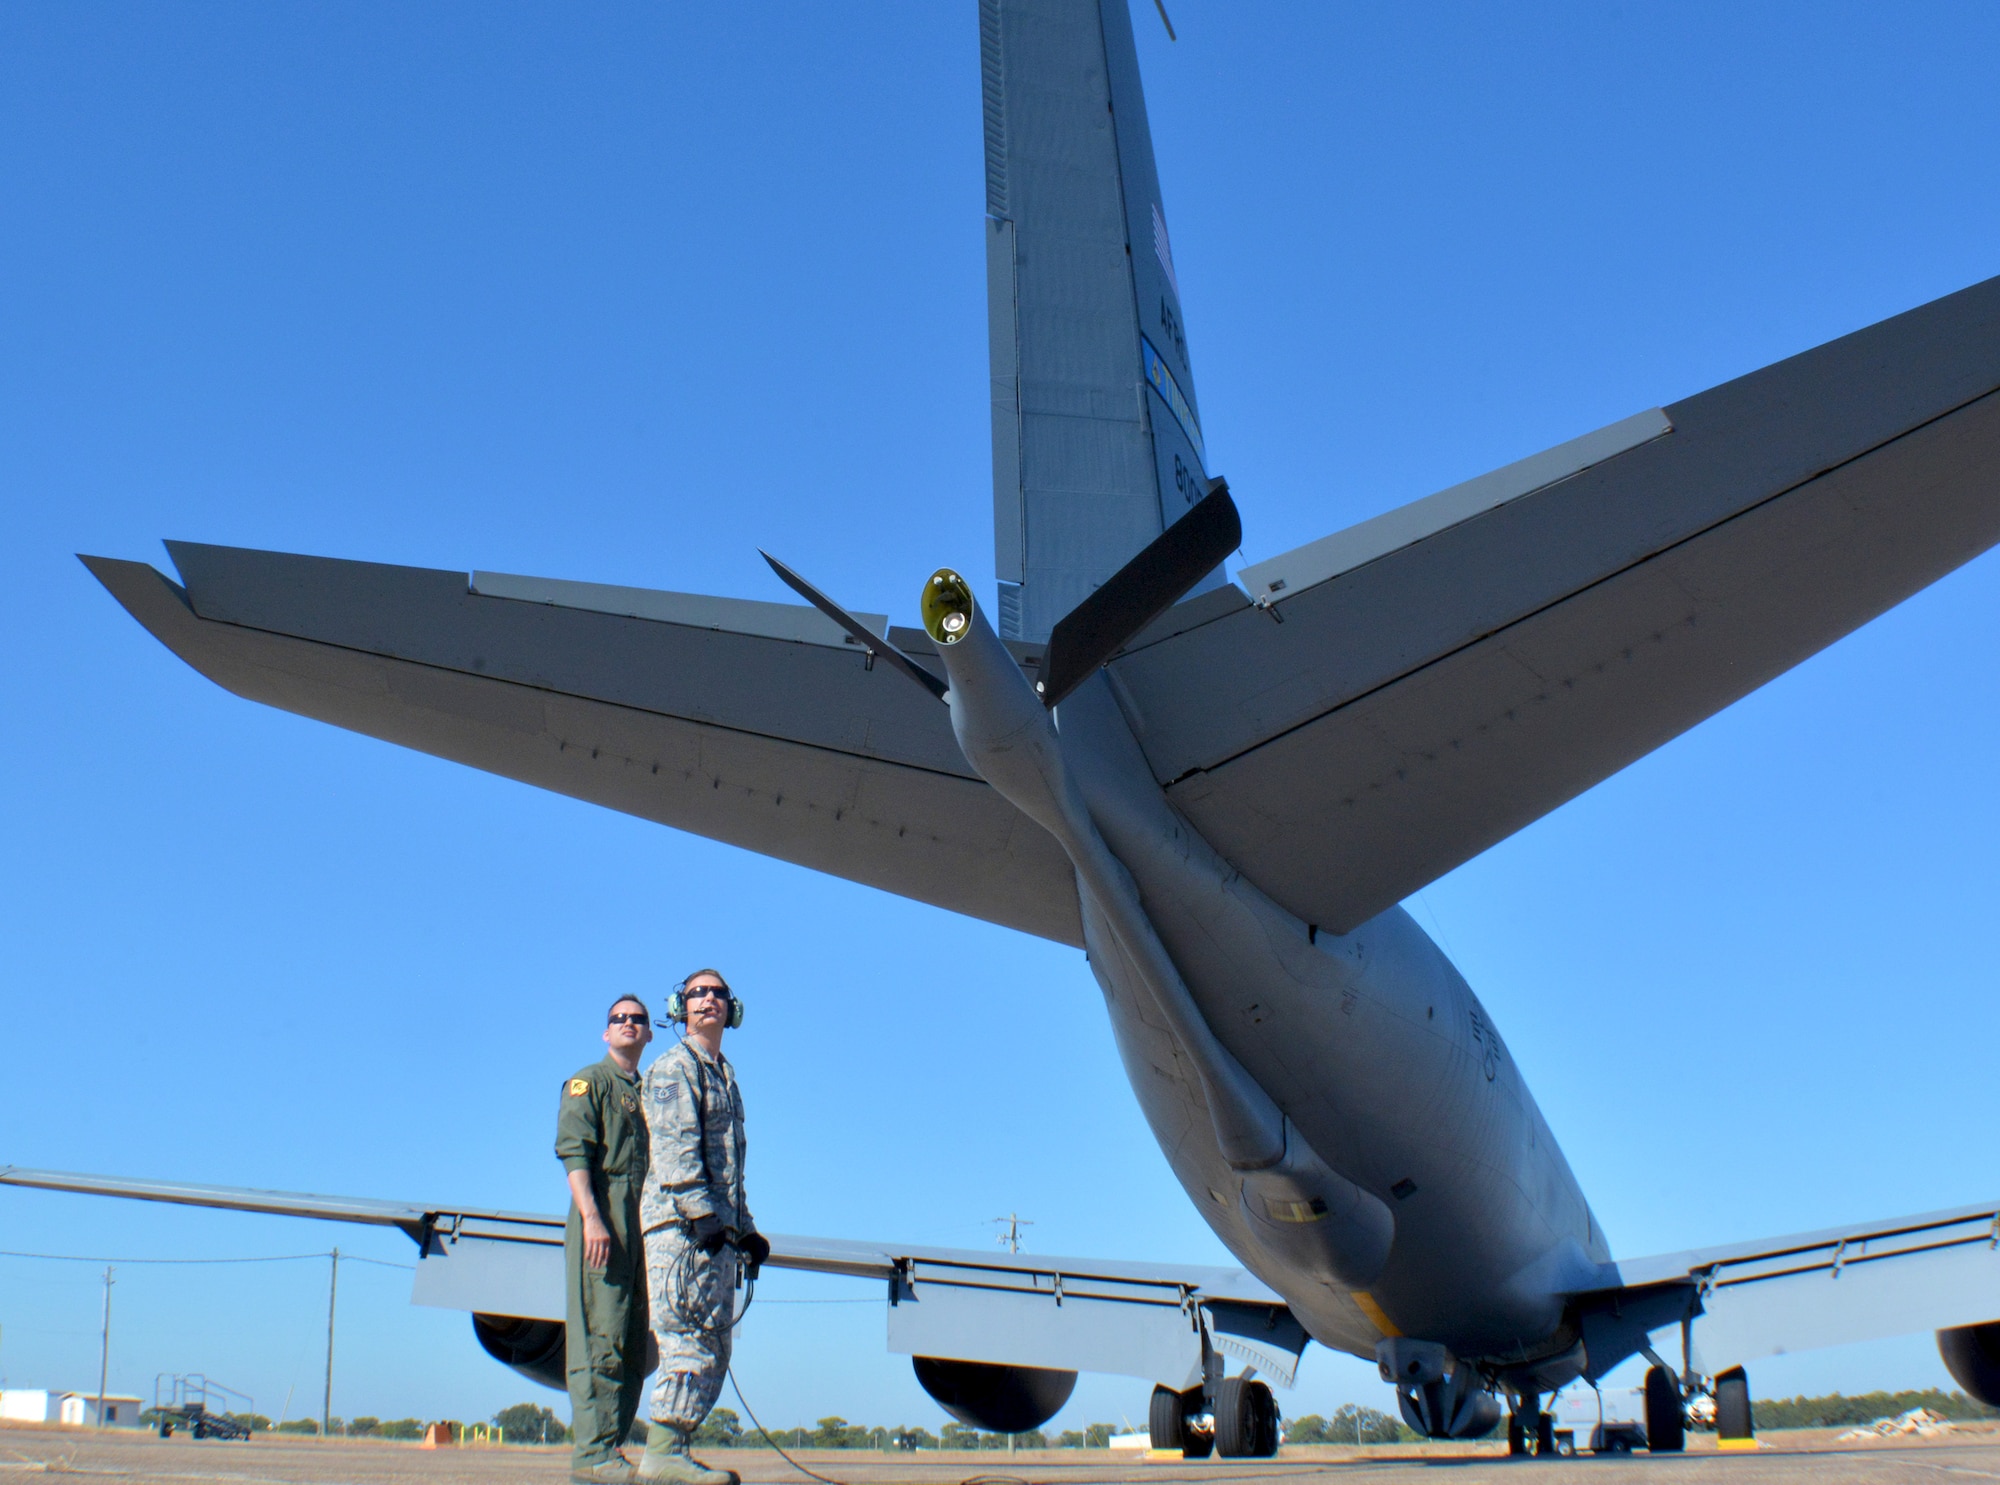 507th Aircraft Maintenance Squadron Tech. Sgts. Michael Dunning, crew chief, and Eric Harmon, avionics technician, from Tinker Air Force Base, Okla., observe flight operations while preparing a KC-135R Stratotanker for flight at Eglin AFB, Fla., Nov. 28, 2017. 507th Air Refueling Wing Reserve Citizen Airmen from Tinker AFB flew the KC-135R to Eglin AFB for testing of the Large Aircraft Infrared Countermeasures modification recently installed on the aircraft. (U.S. Air Force photo/Tech. Sgt. Samantha Mathison)